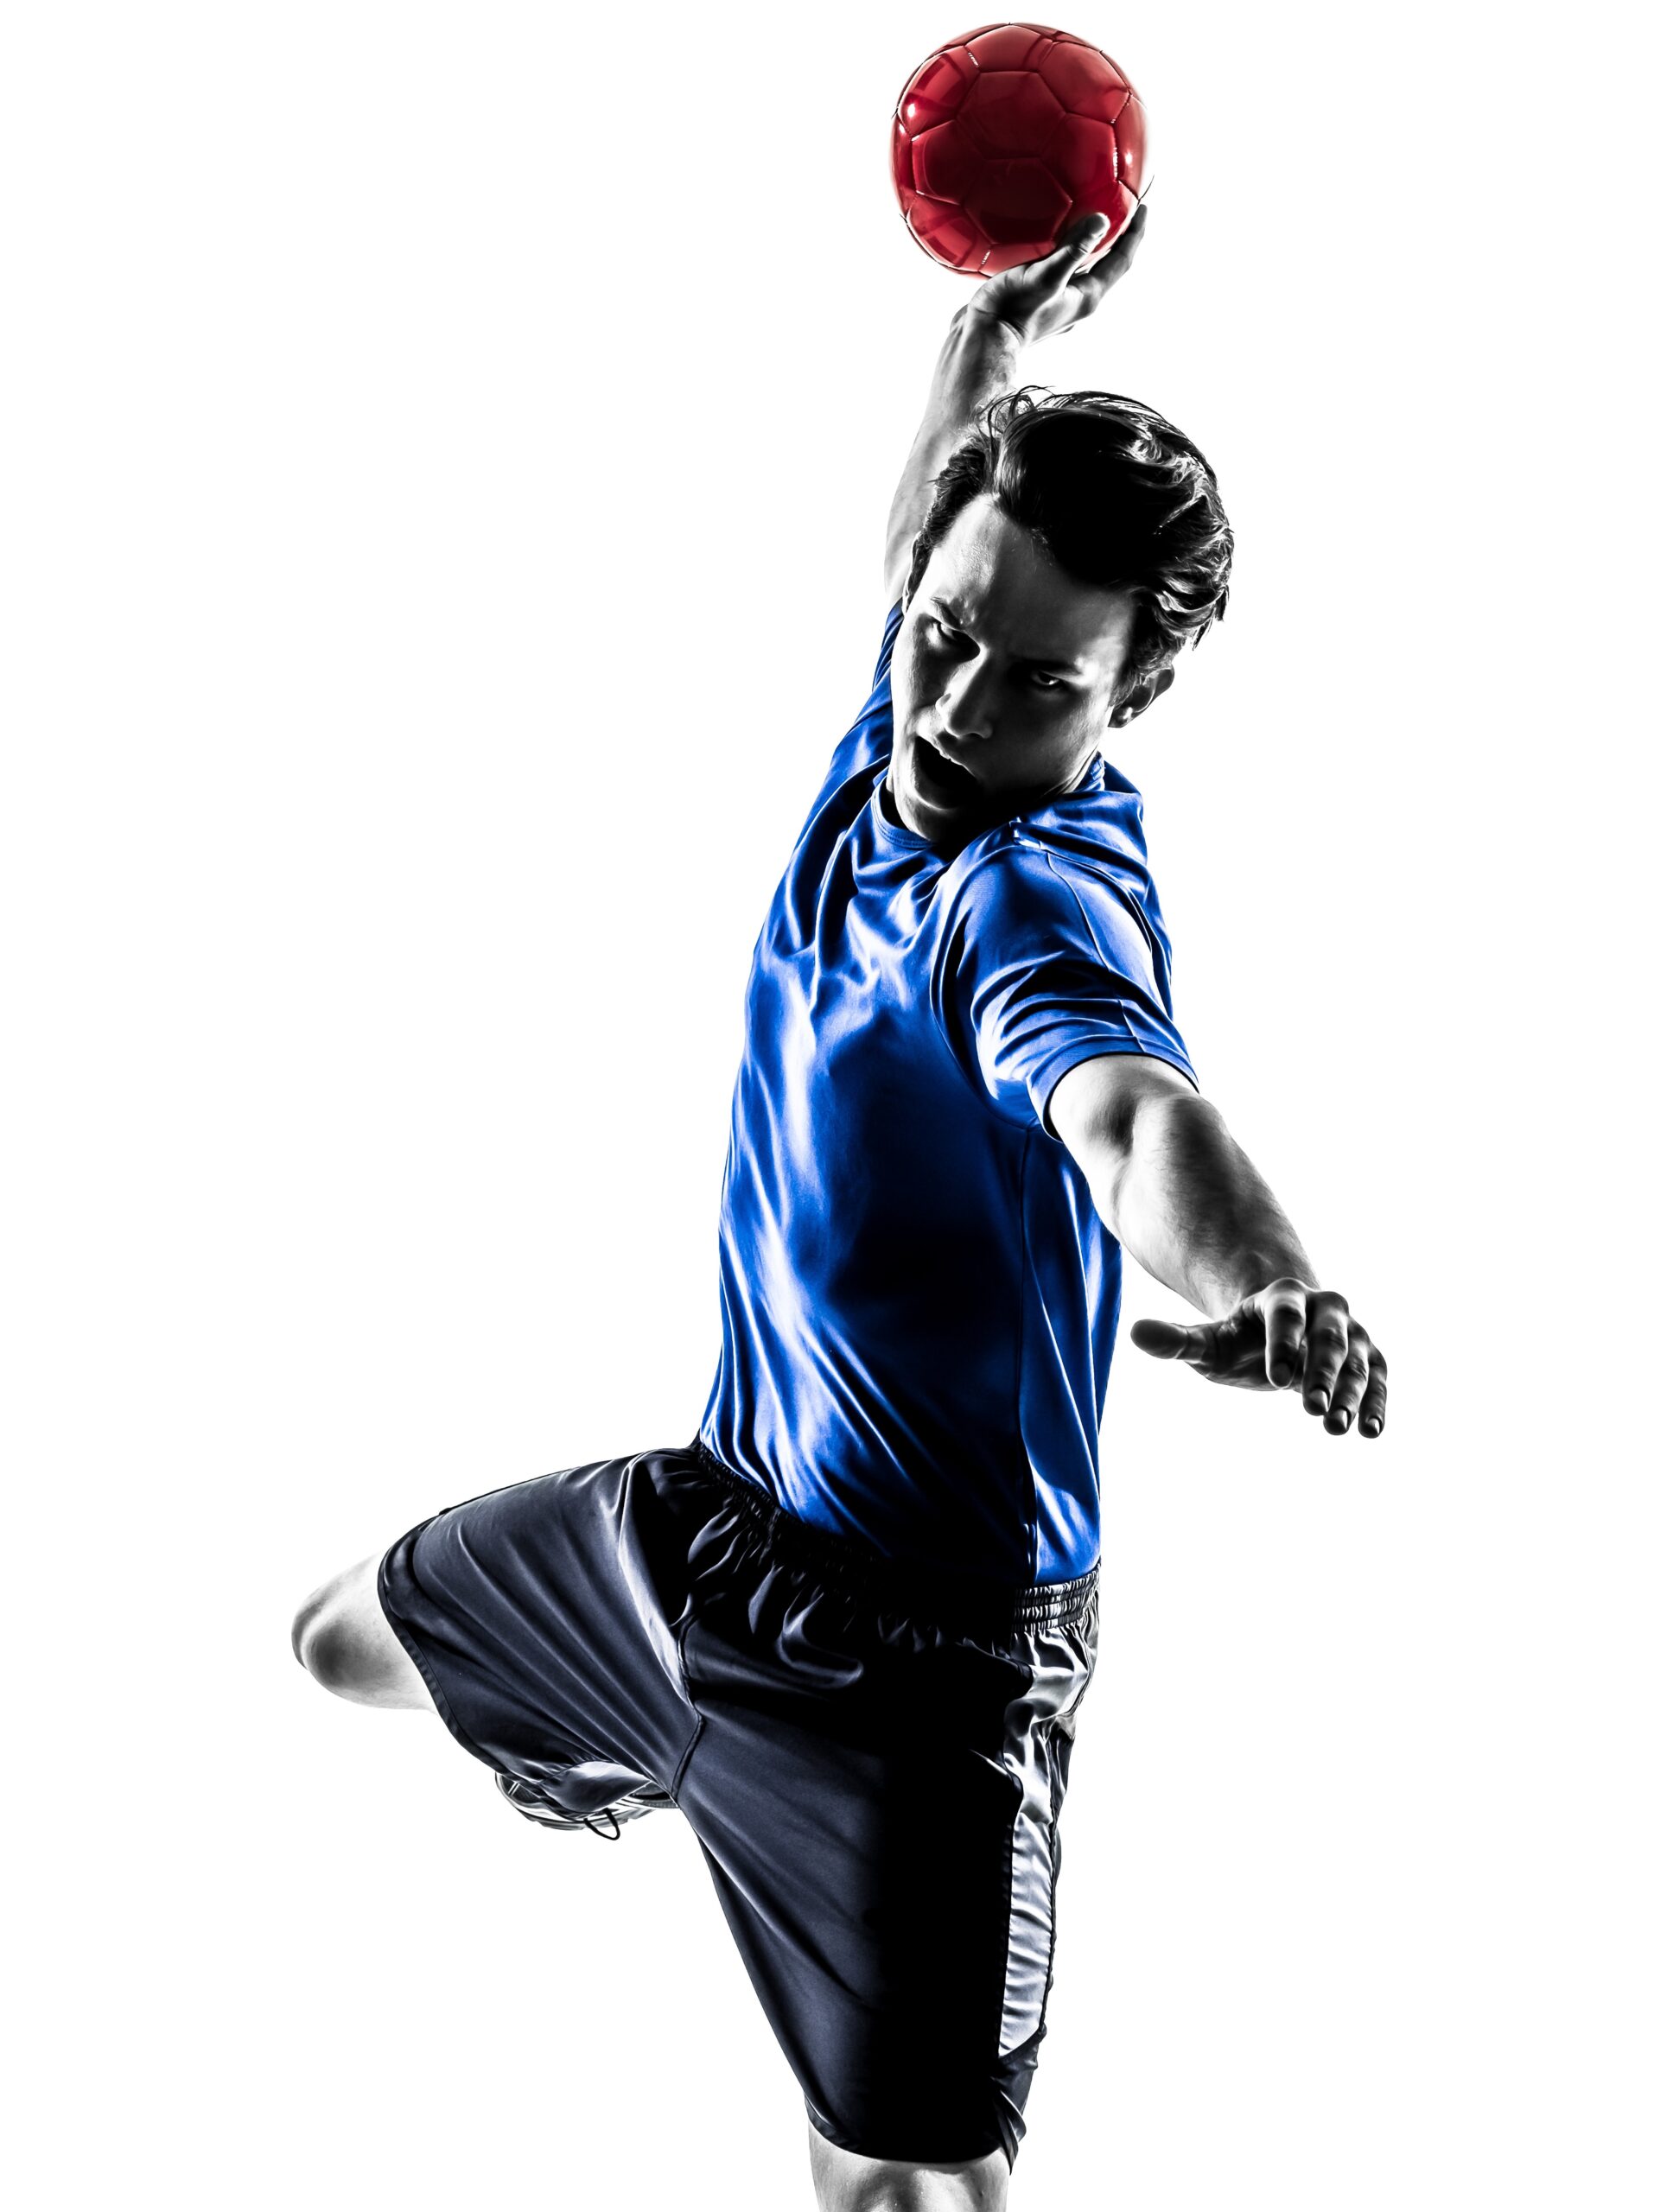 Zweite Karriere: one caucasian young man exercising handball player in silhouette studio  on white background